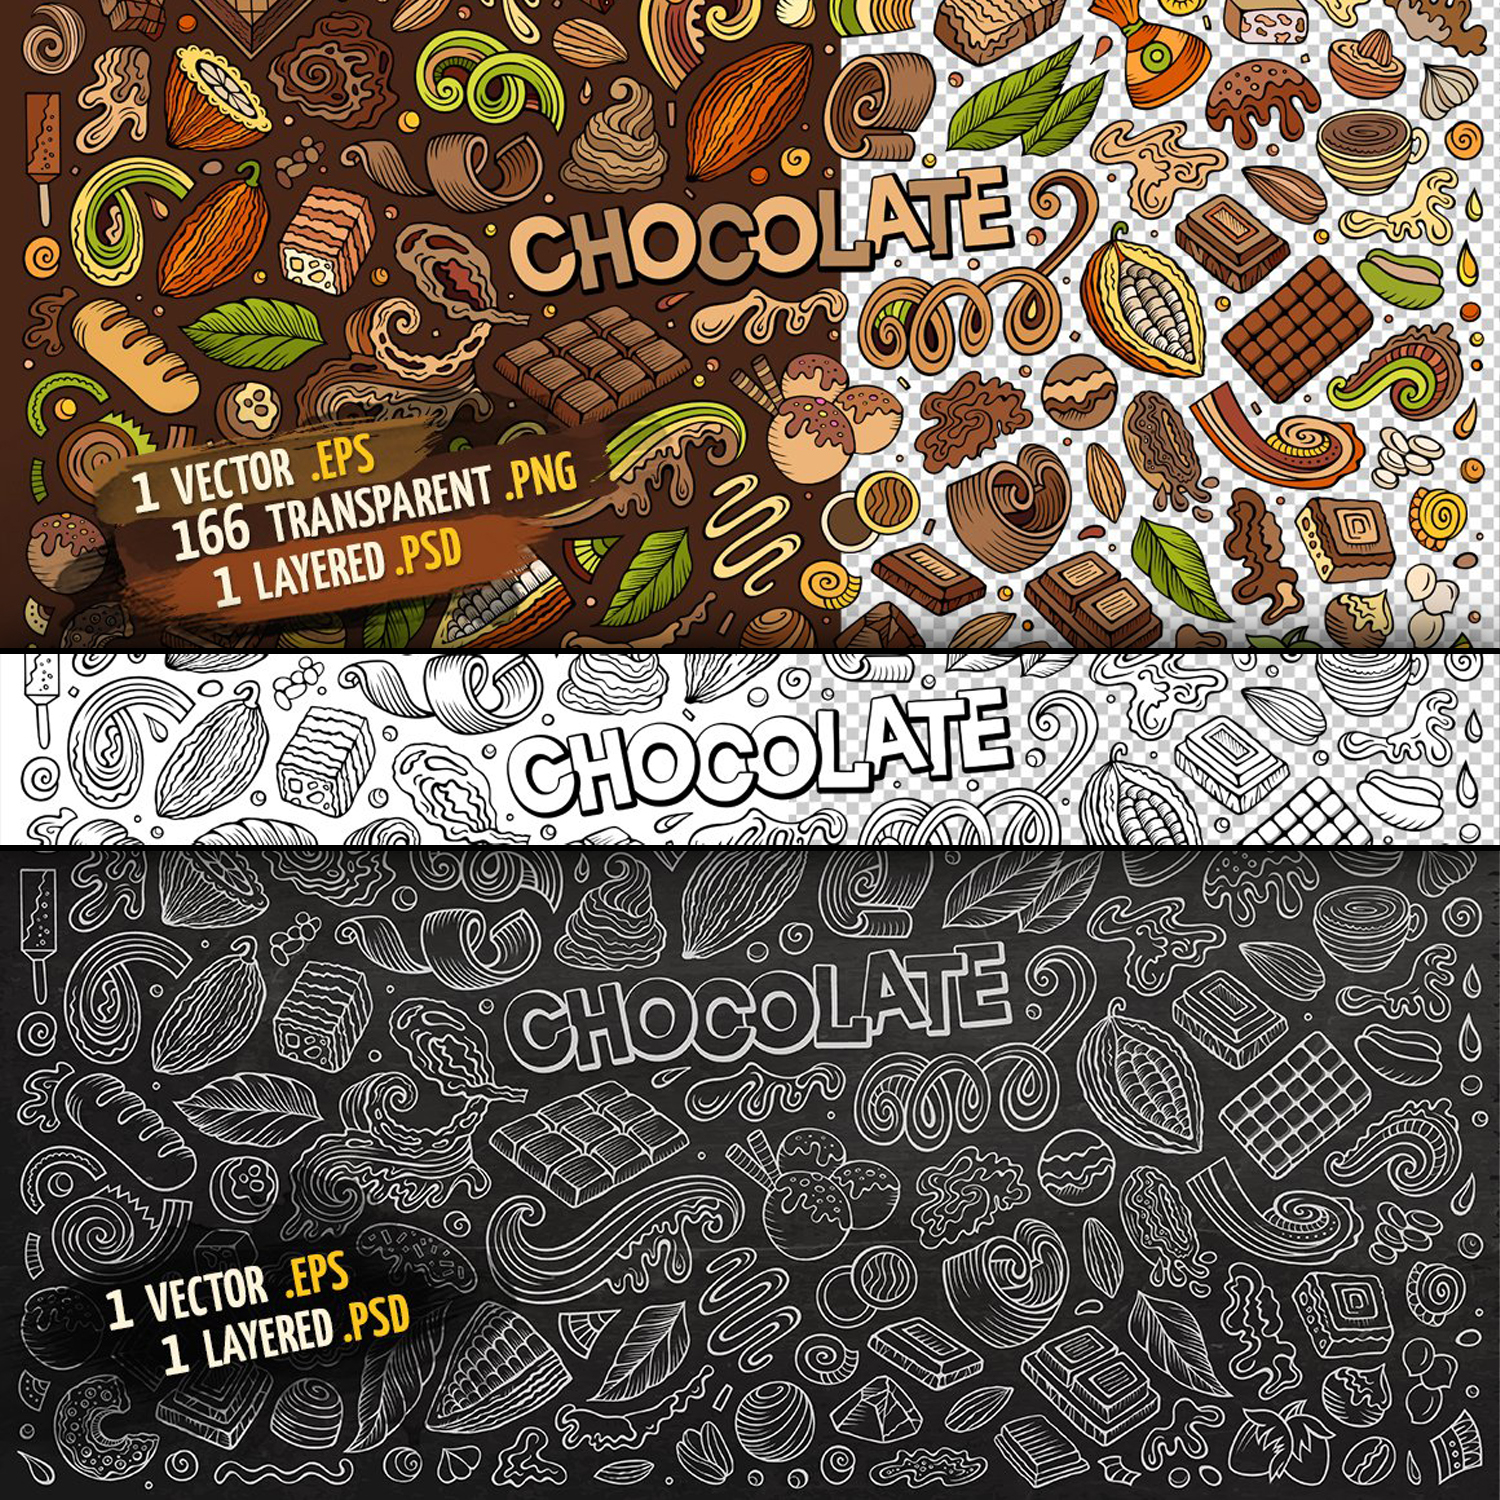 Elements of chocolate theme.